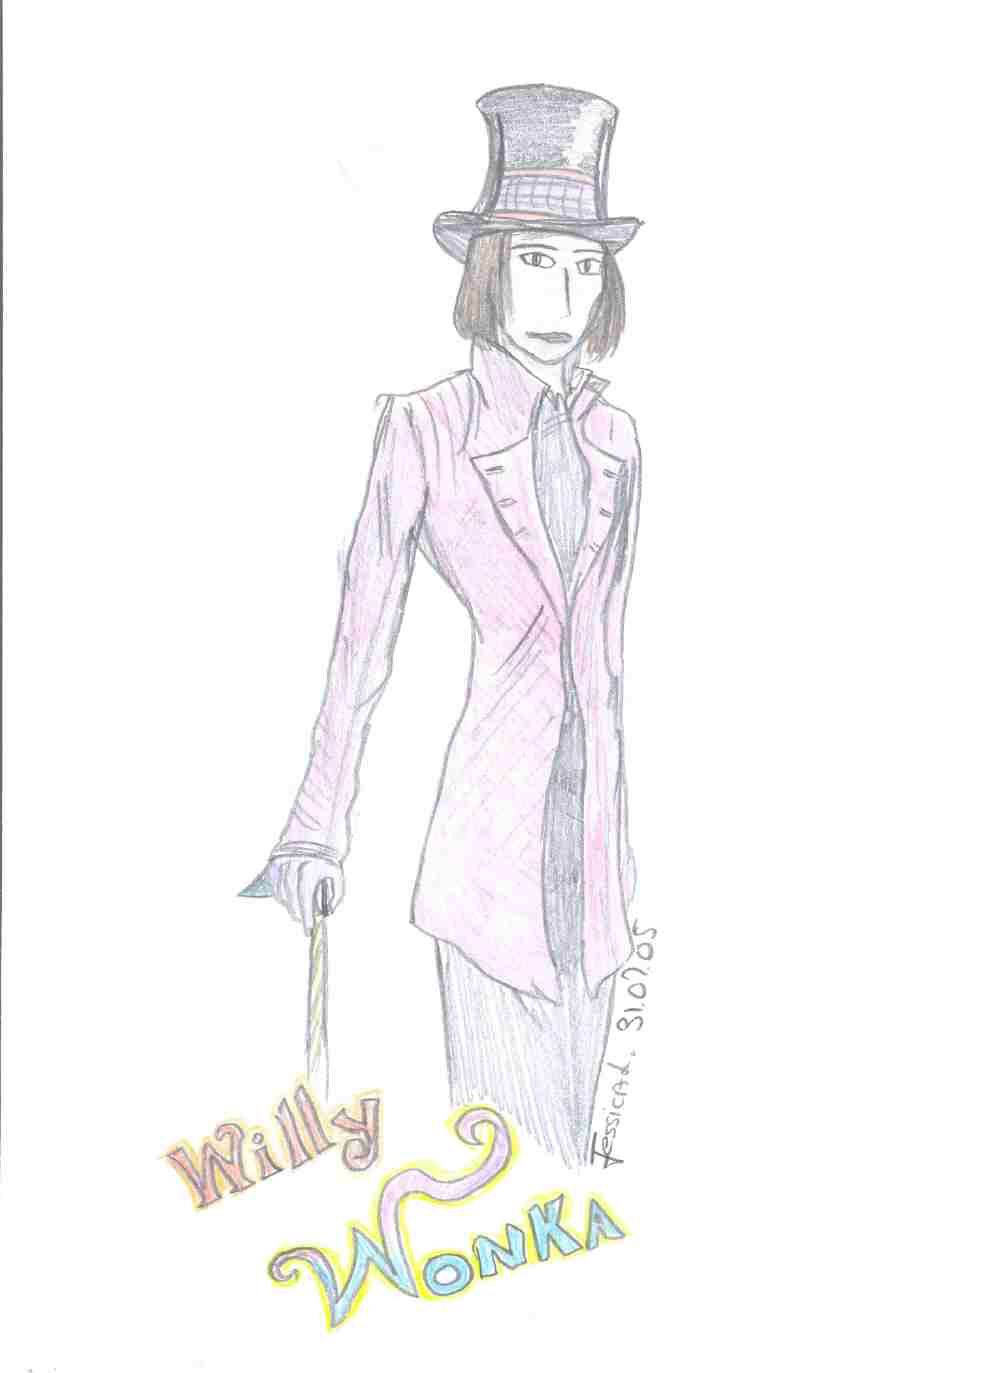 Willy Wonka is the best by Cromwell